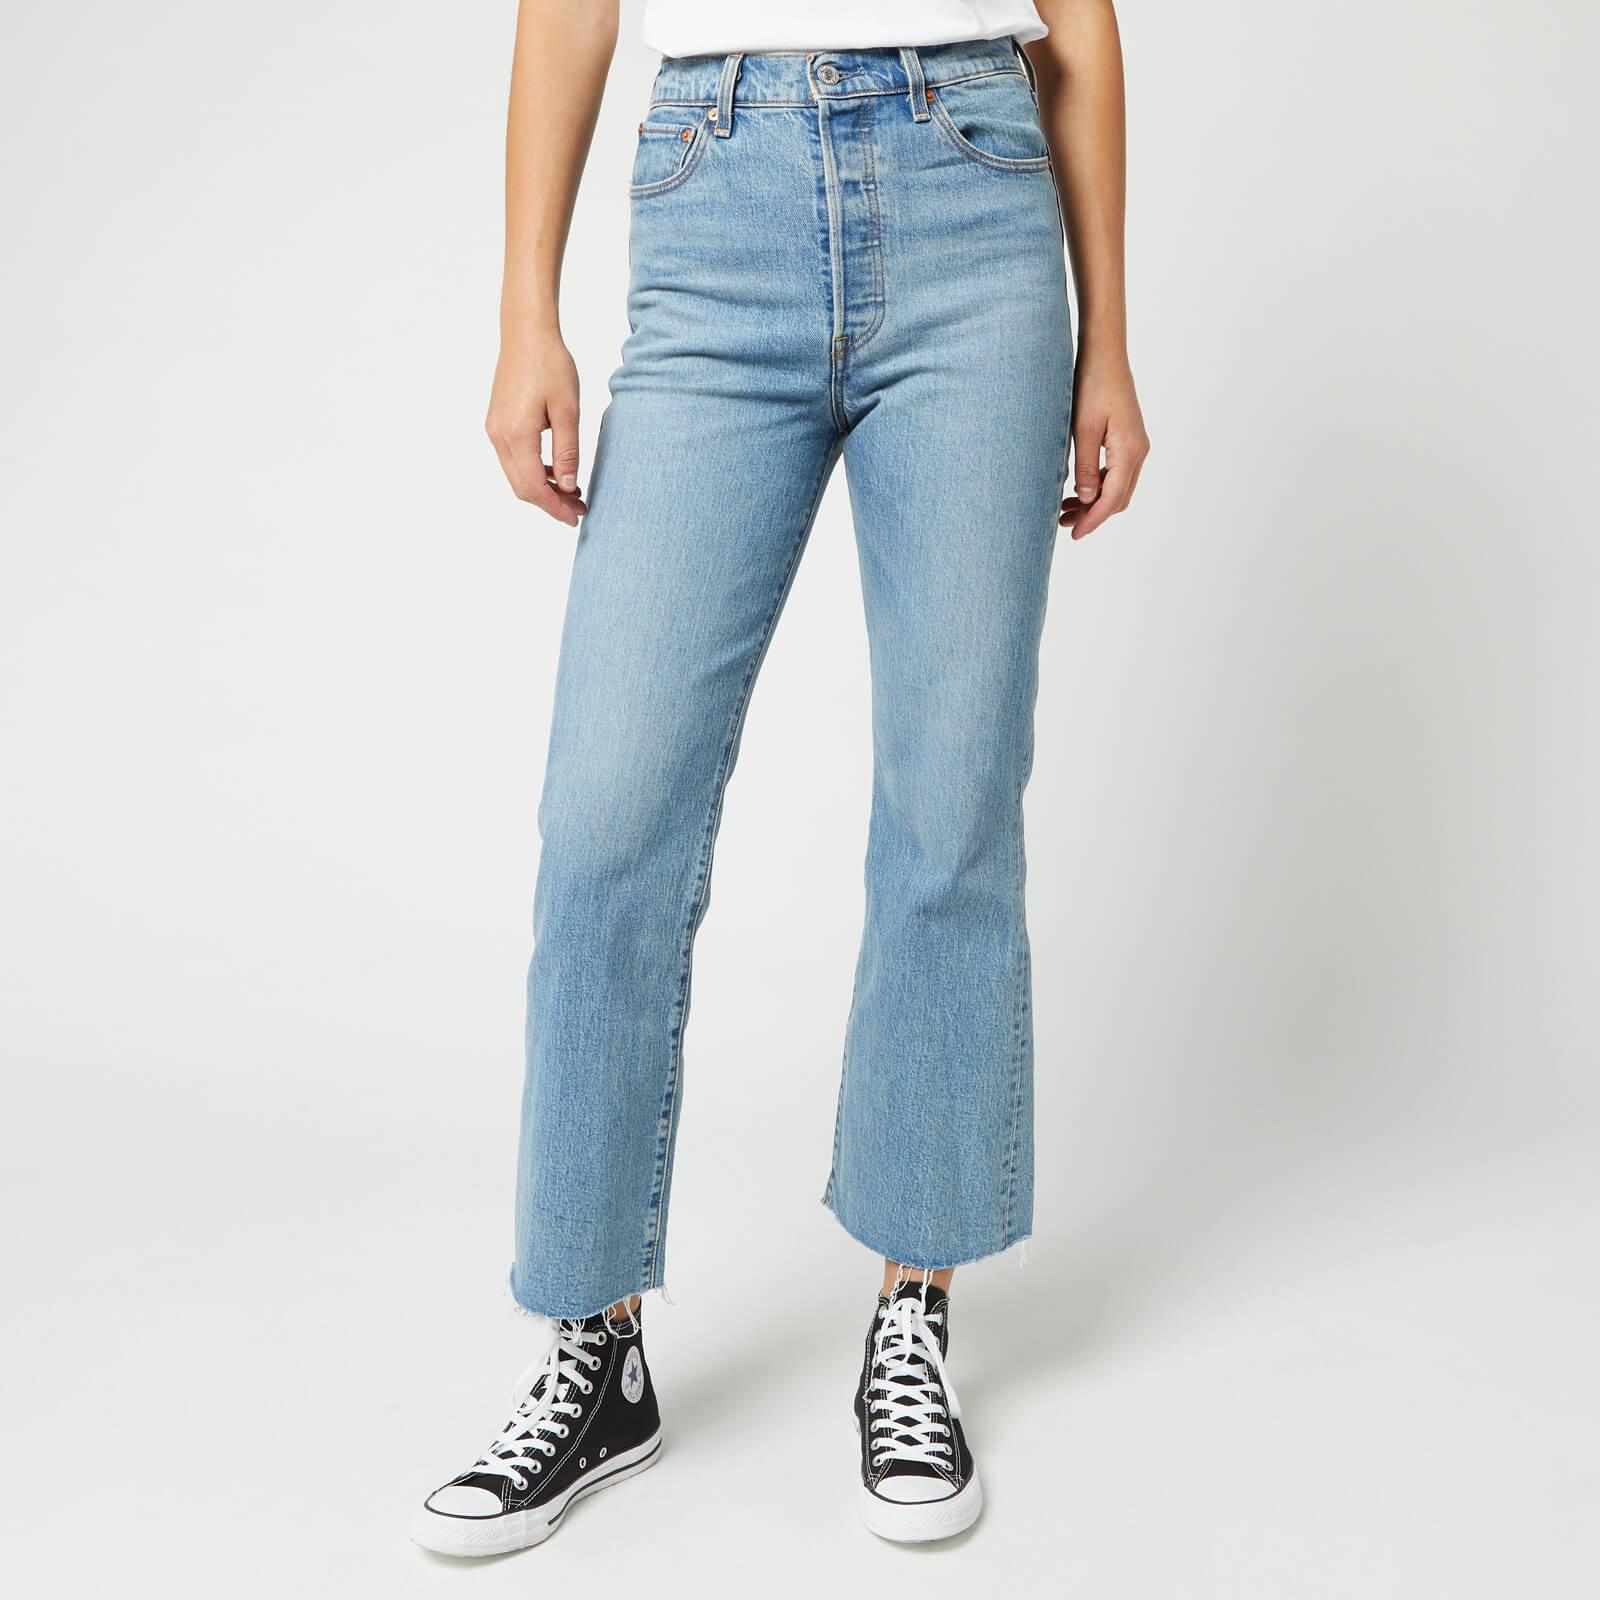 Levi's Denim Ribcage Crop Flare Jeans in Blue - Lyst